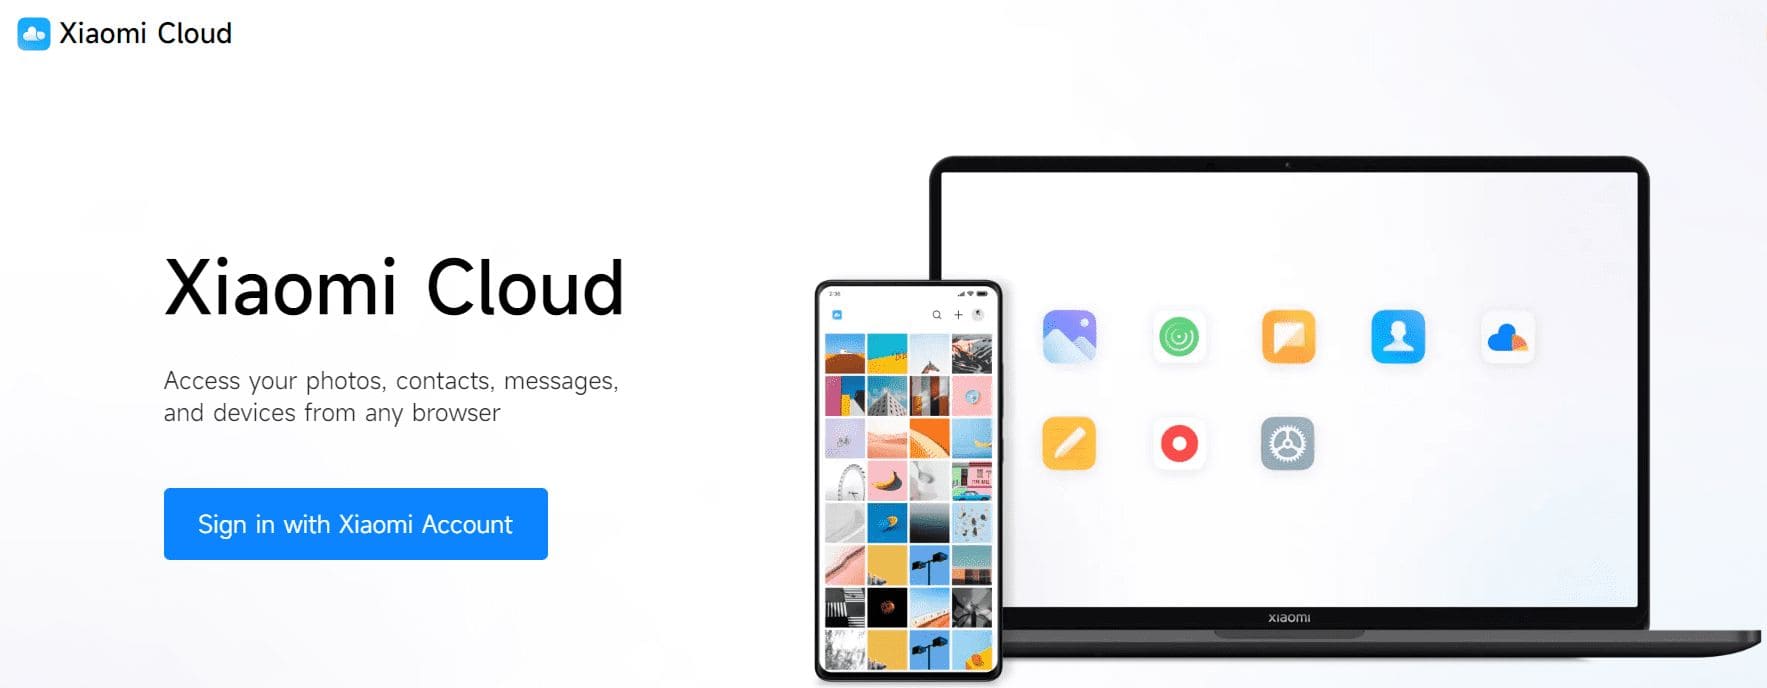 an image of Xiaomi cloud showing Find Device icon